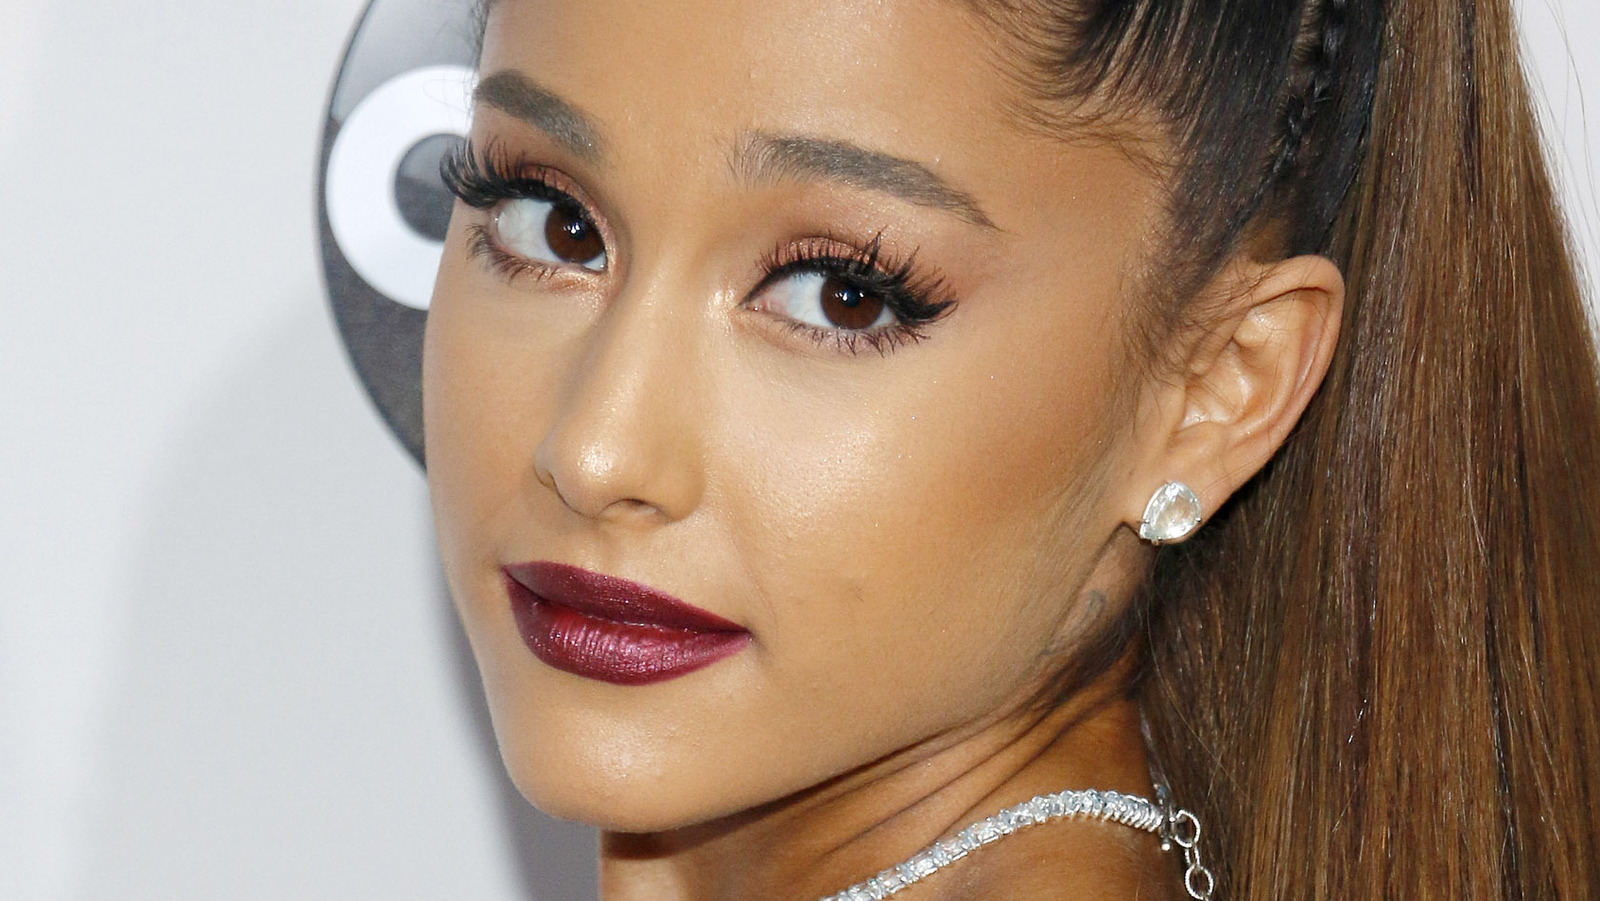 Victoria Justice Shuts Down Ariana Grande Feud Rumors: 'This Is So